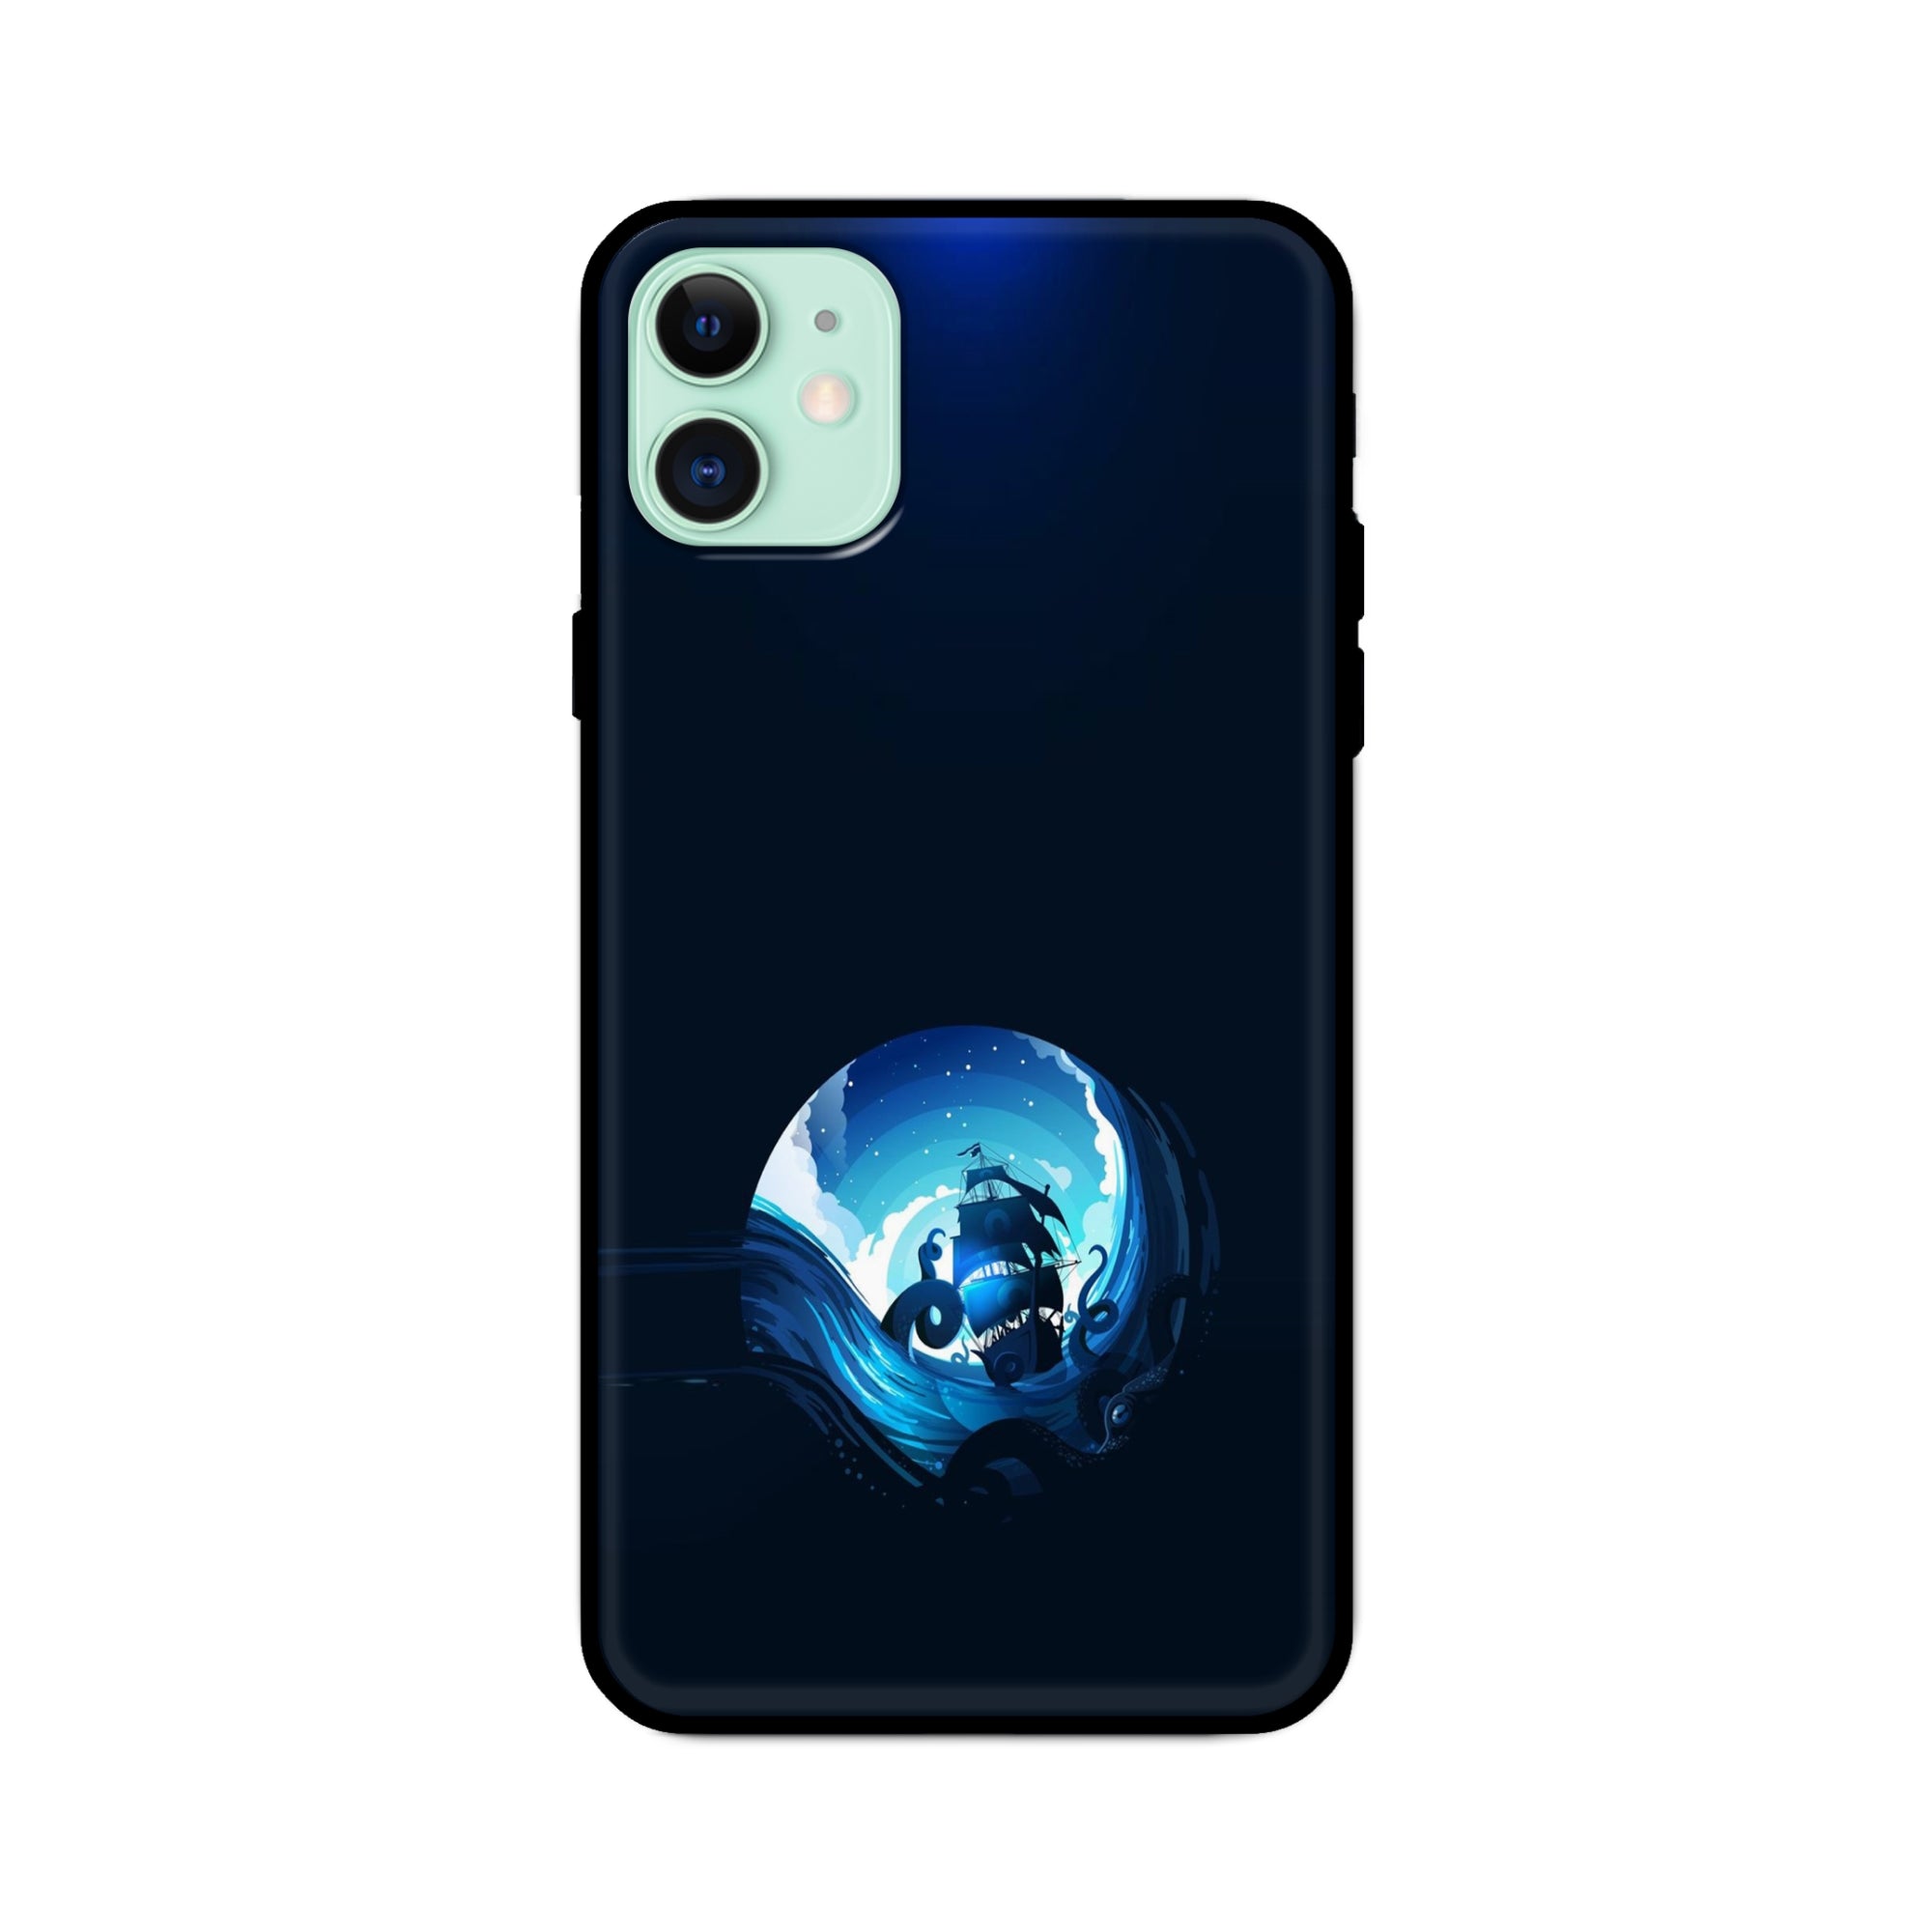 Buy Blue Seaship Glass/Metal Back Mobile Phone Case/Cover For iPhone 11 Online